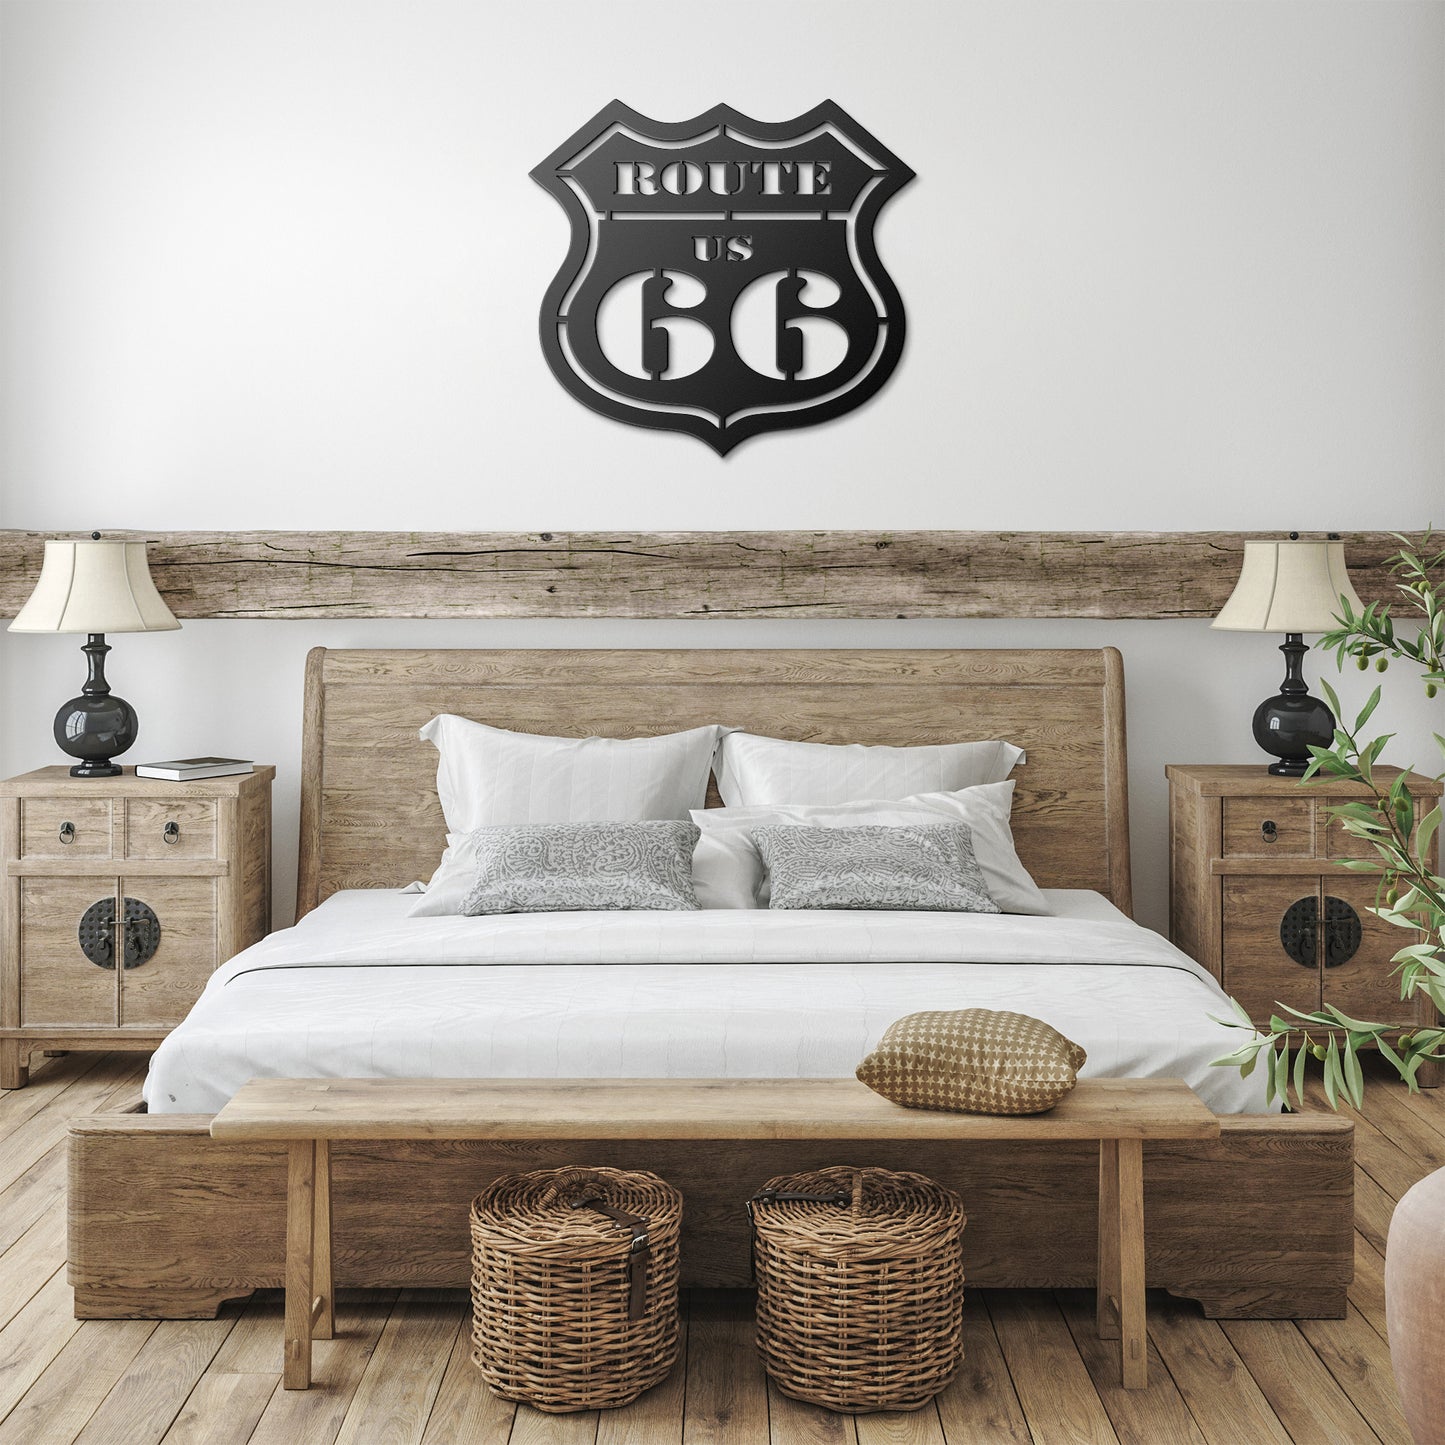 ROUTE 66 METAL SIGN ART